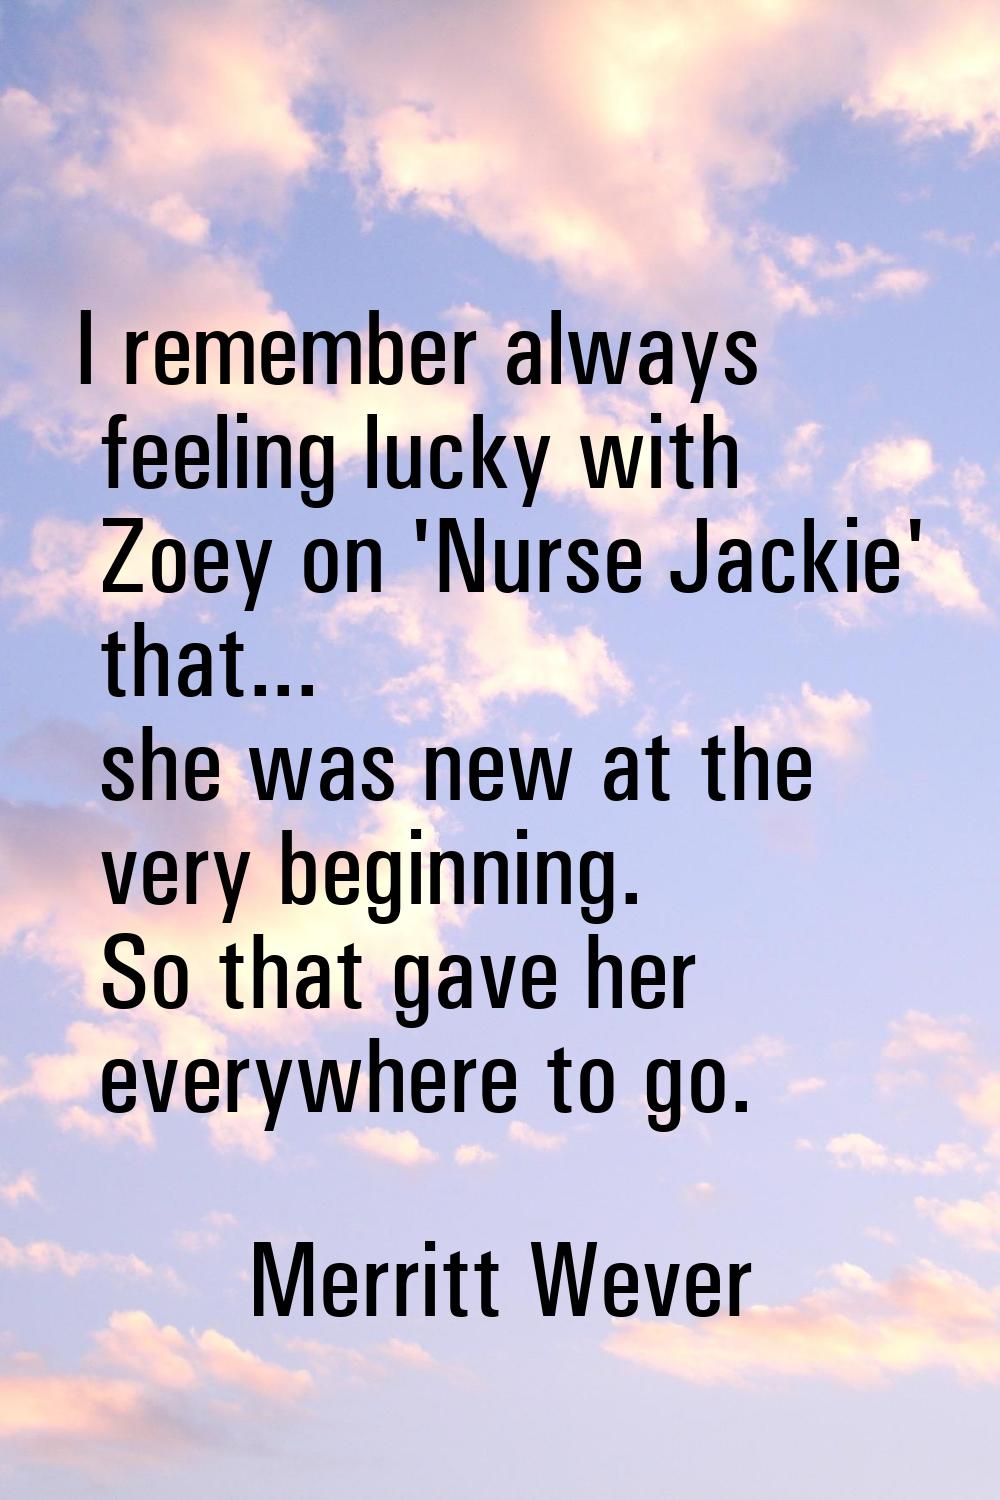 I remember always feeling lucky with Zoey on 'Nurse Jackie' that... she was new at the very beginni